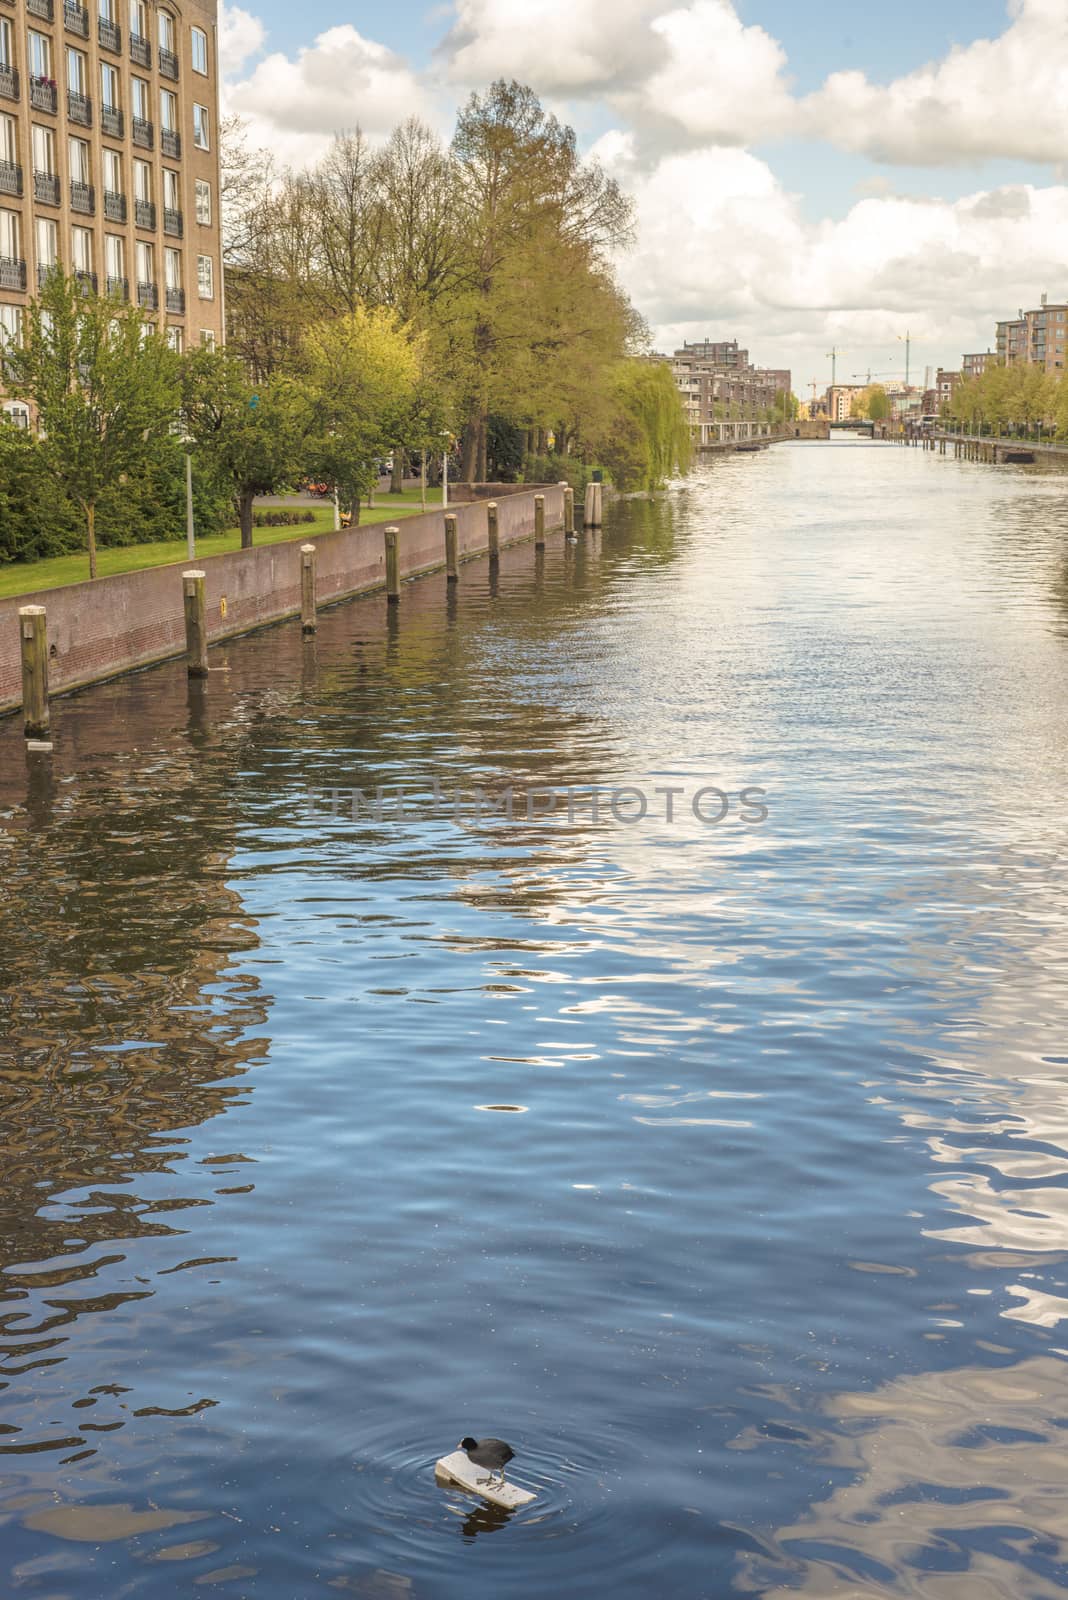 A Eurasian Coot standing on styrofoam in an Amsterdam canal